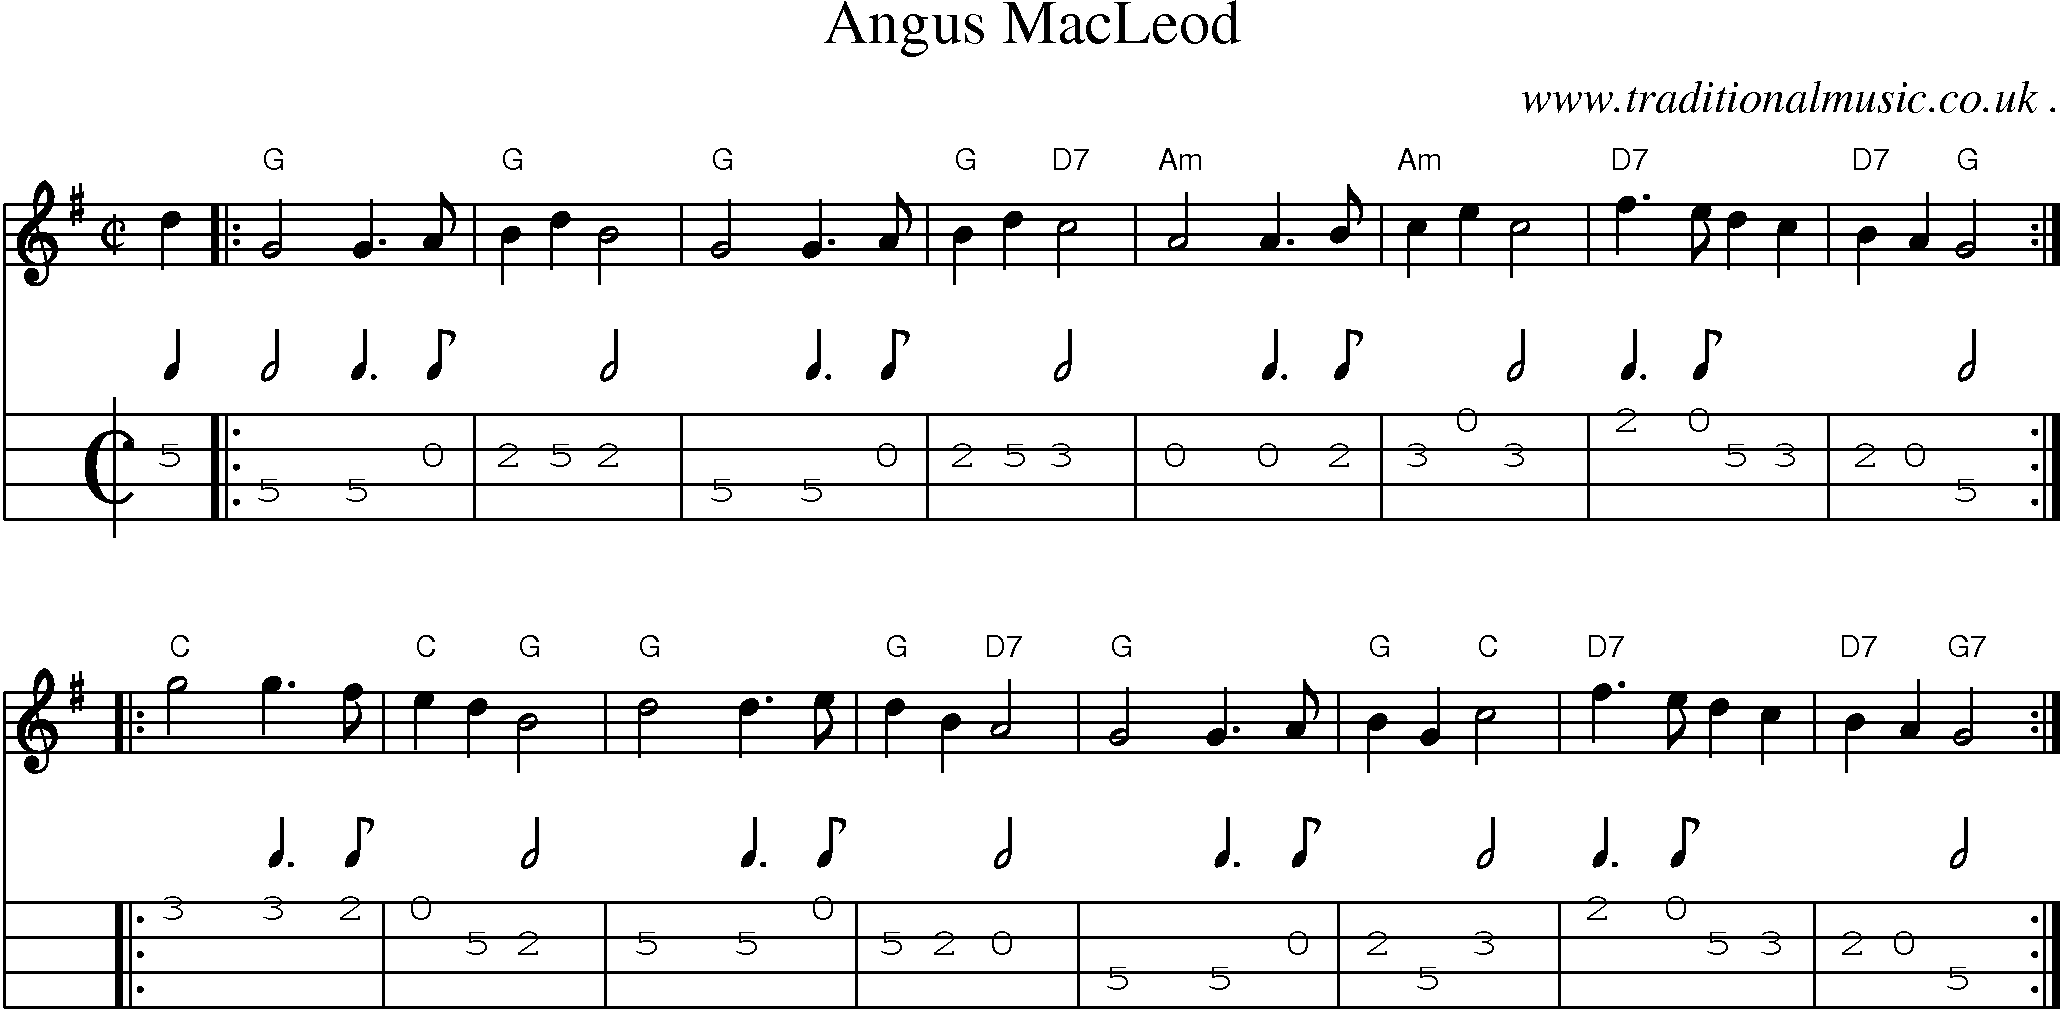 Sheet-music  score, Chords and Mandolin Tabs for Angus Macleod